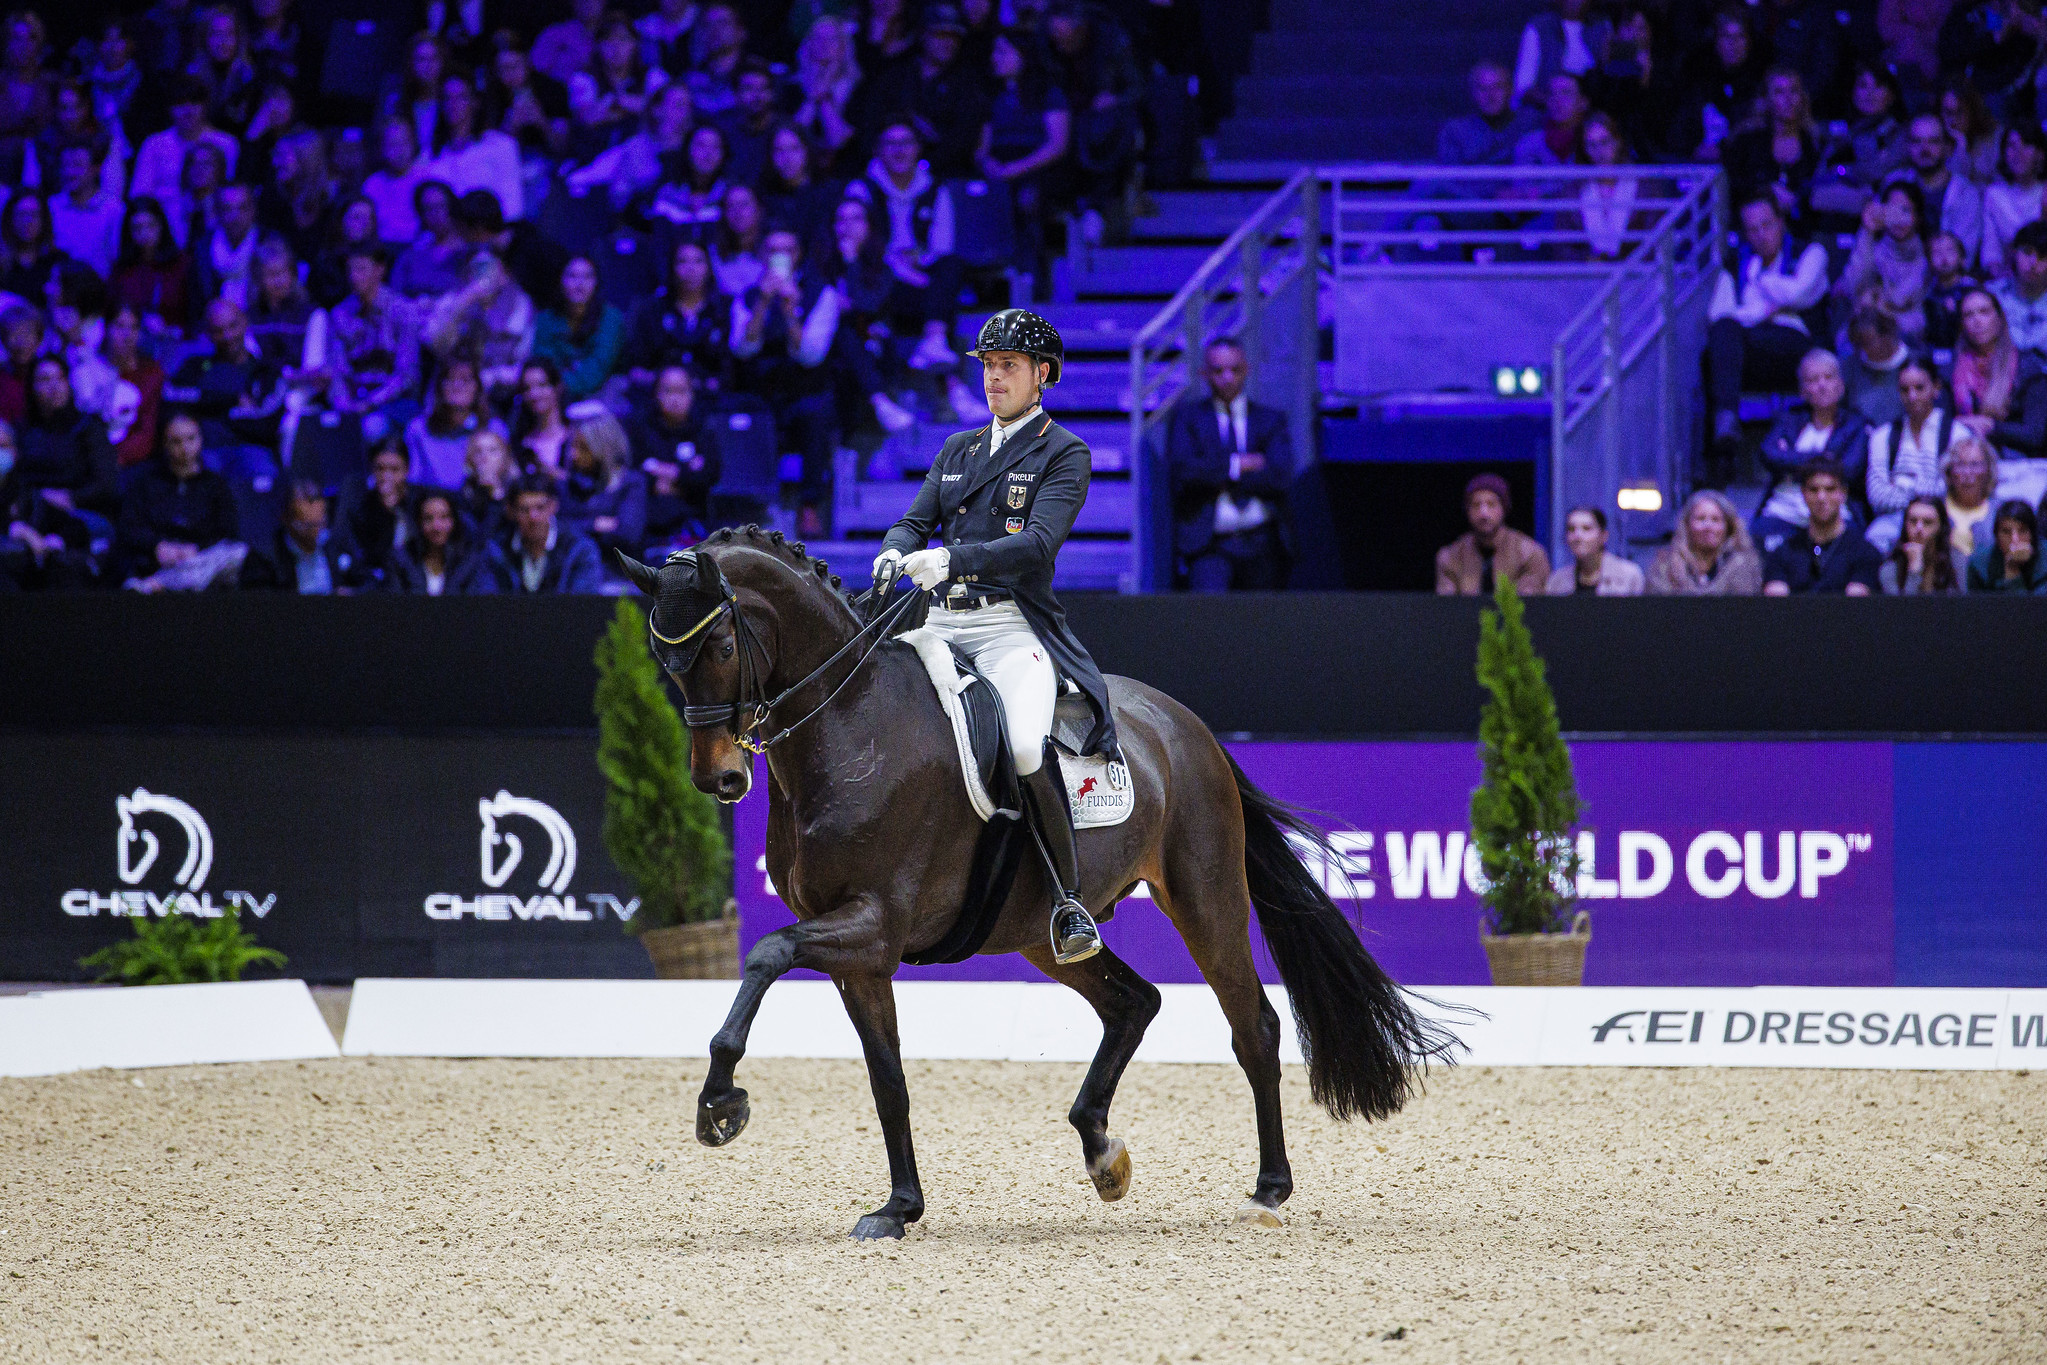 Frederic Wandres (GER) rides on Bluetooth Old winners at the FEI Dressage World Cup 202324 Lyon (FRA) Copyright ©FEI Leanjo de Koster